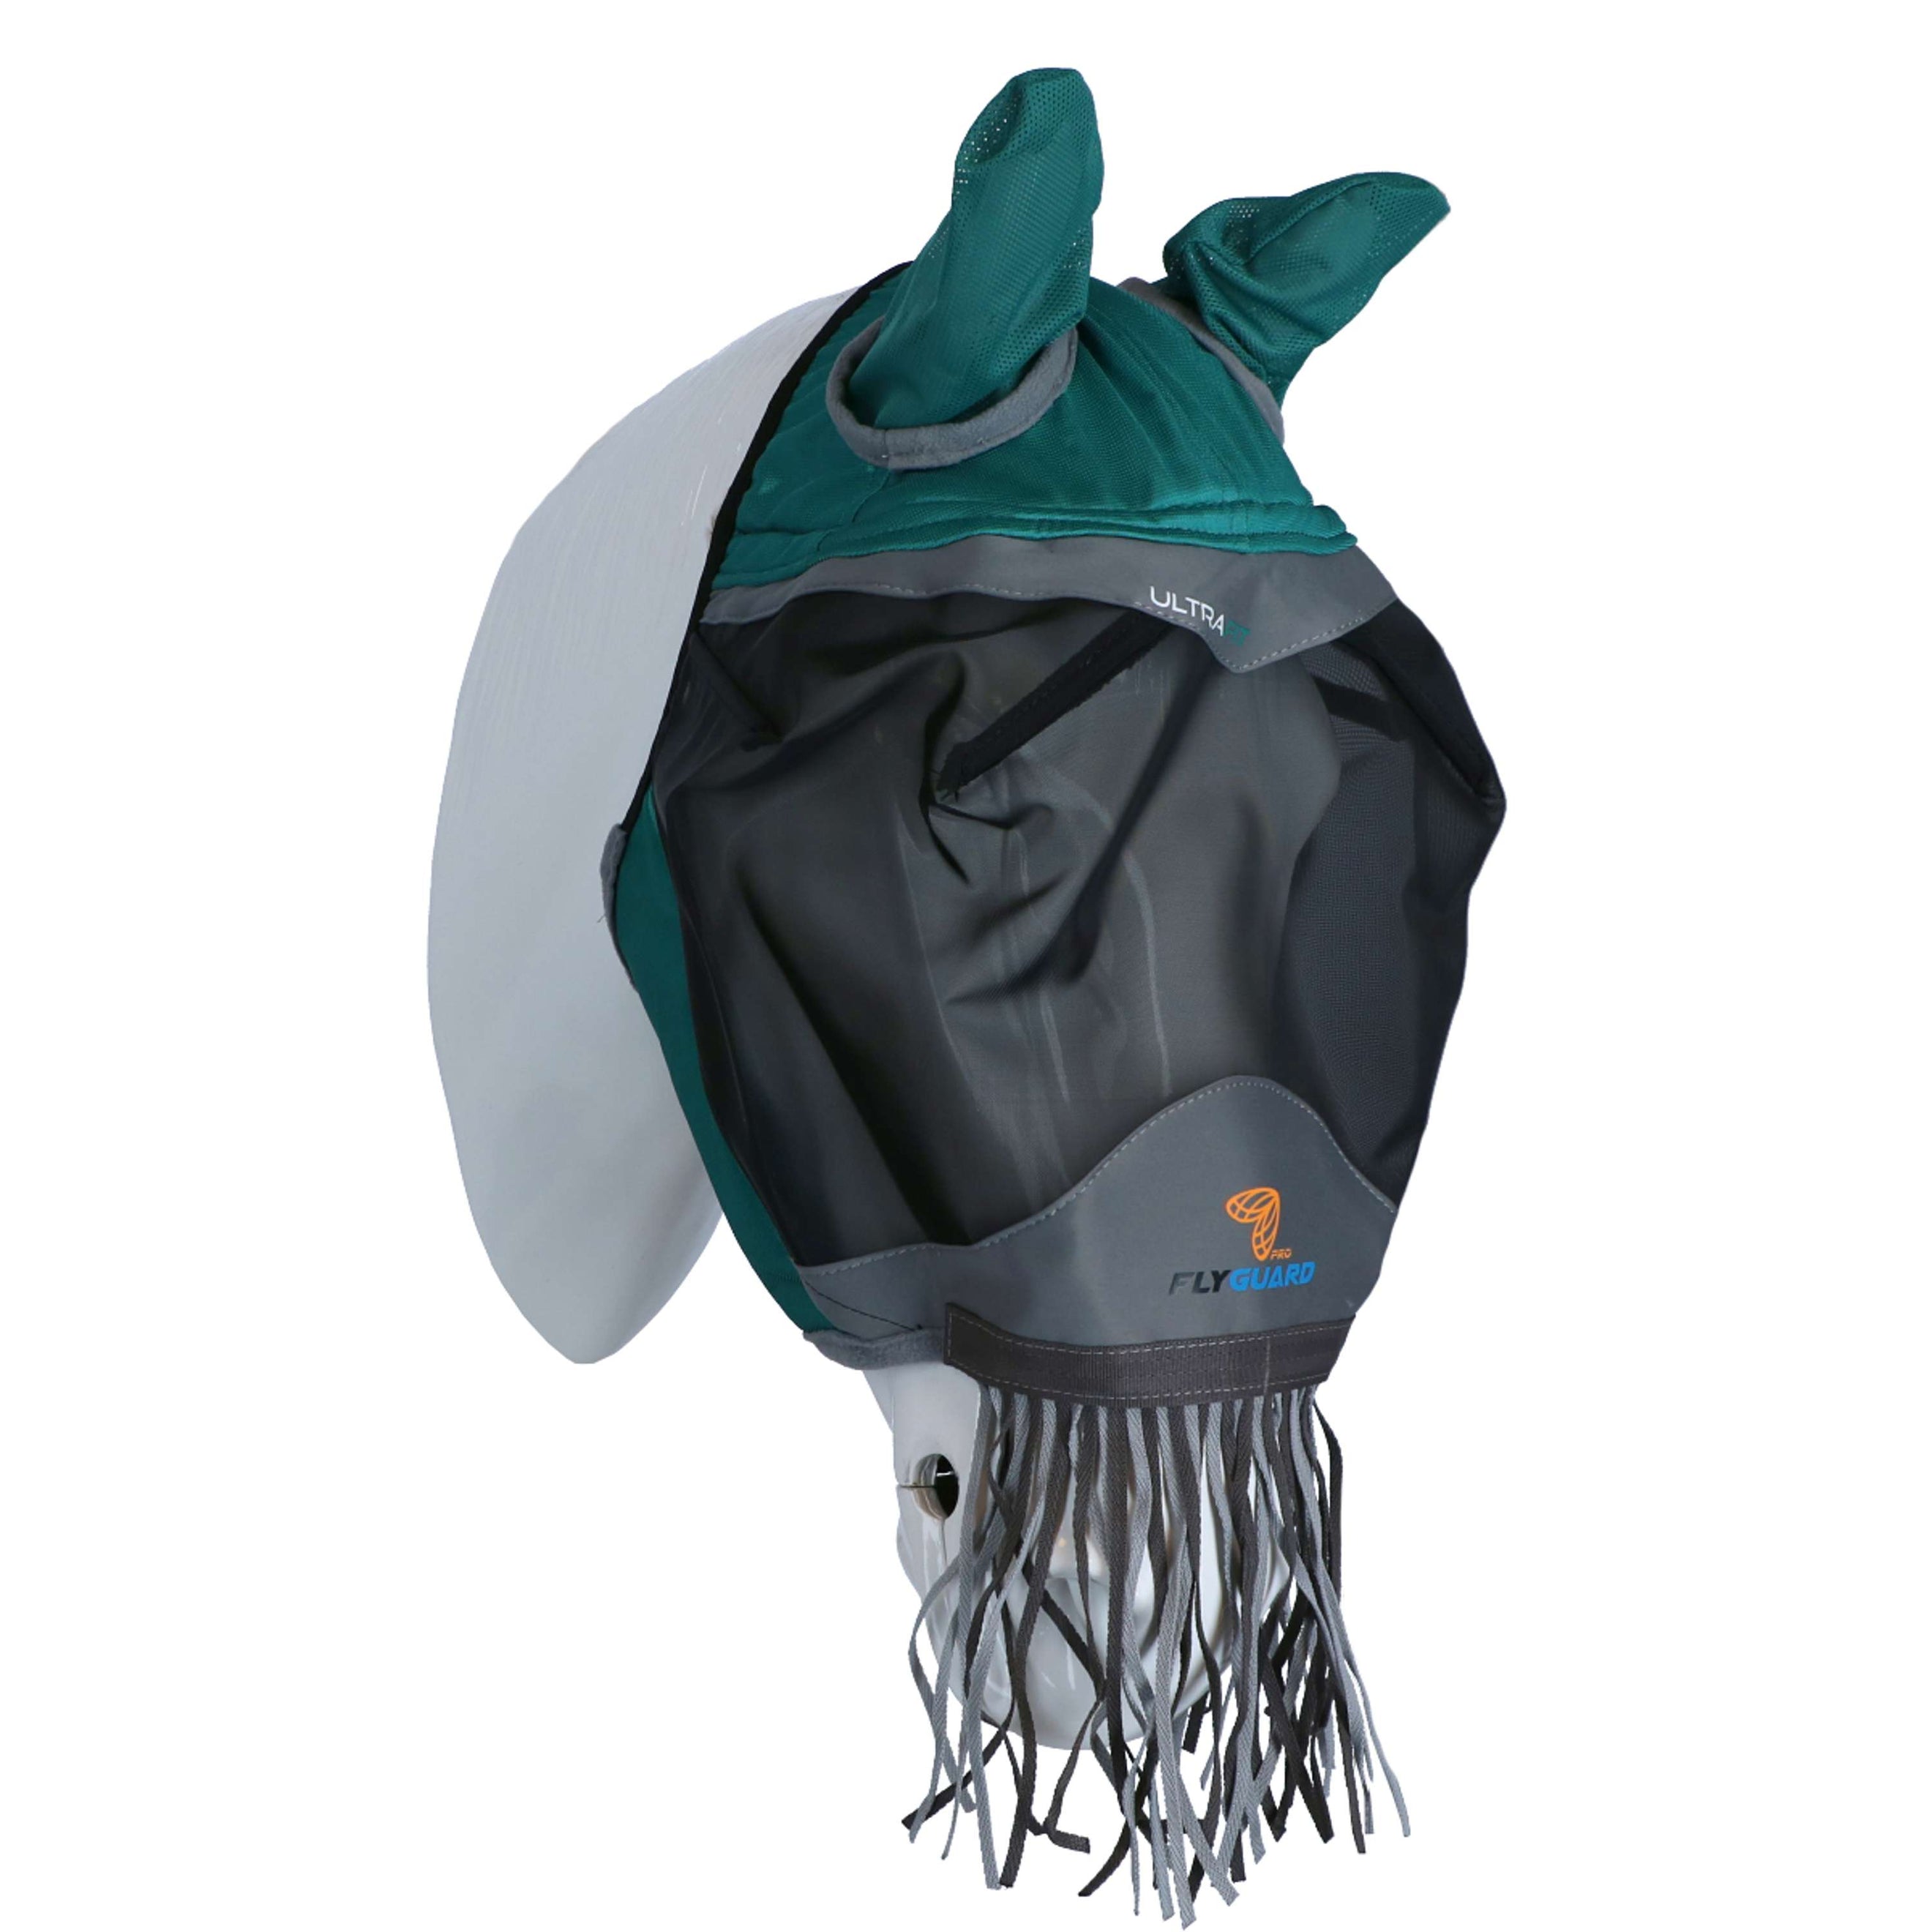 Shires Masque Anti-Mouches Deluxe Vert